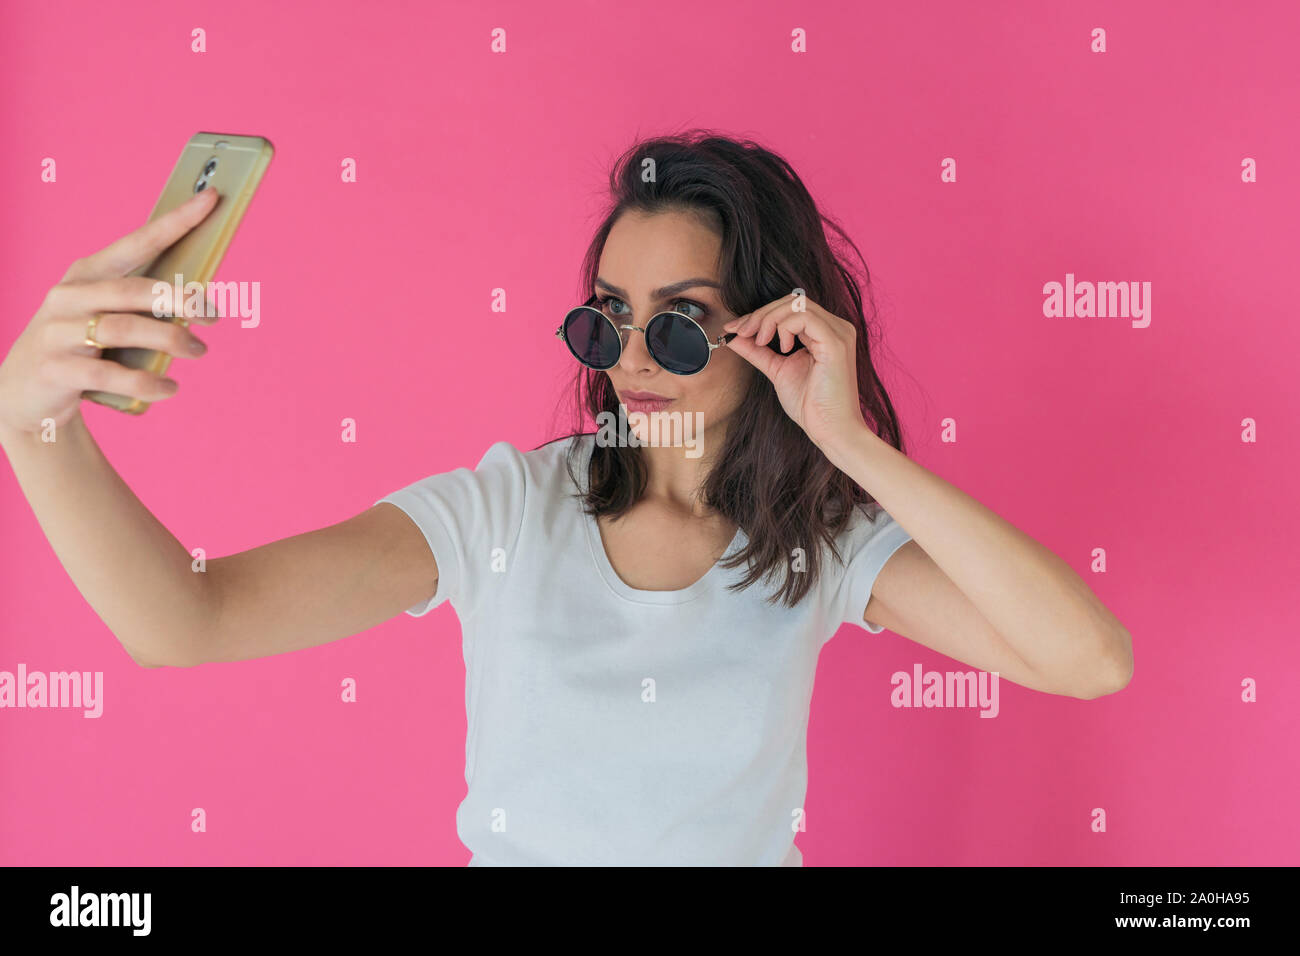 Beautiful girl in round sunglasses takes a selfie on the phone on a hot pink background Stock Photo